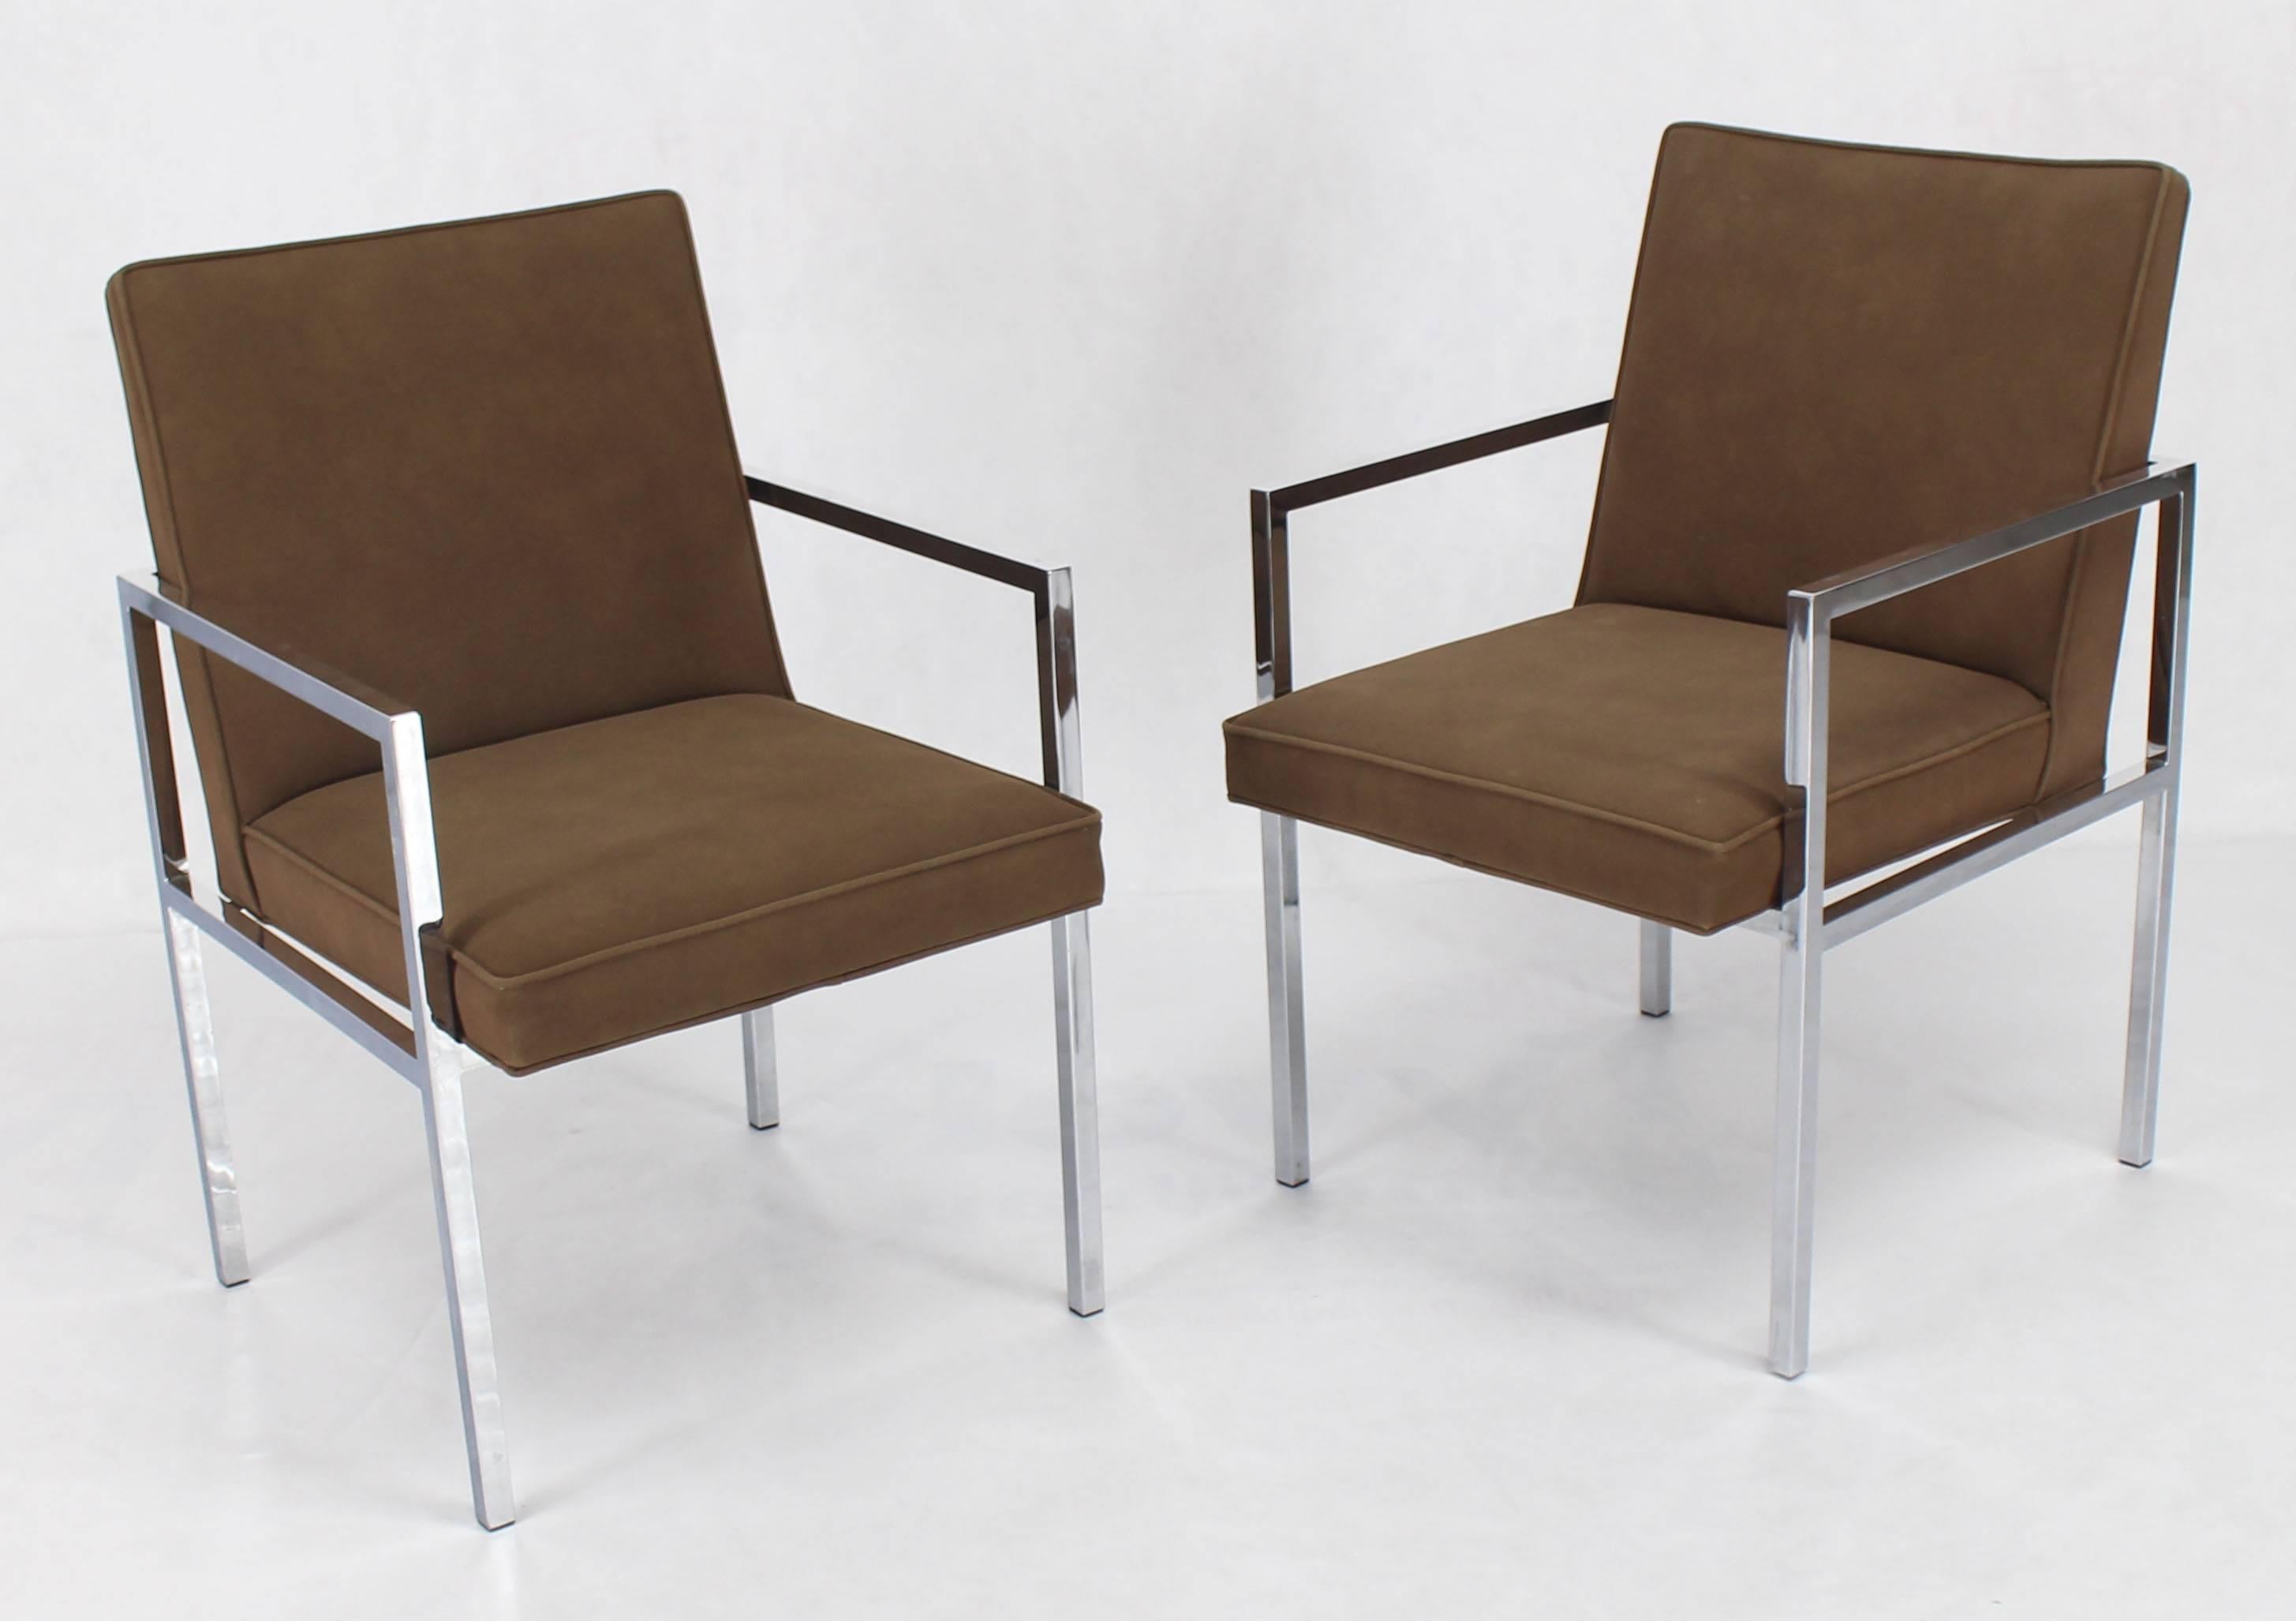 Set of six Mid-Century Modern chrome dining chairs with ultra suede upholstery.